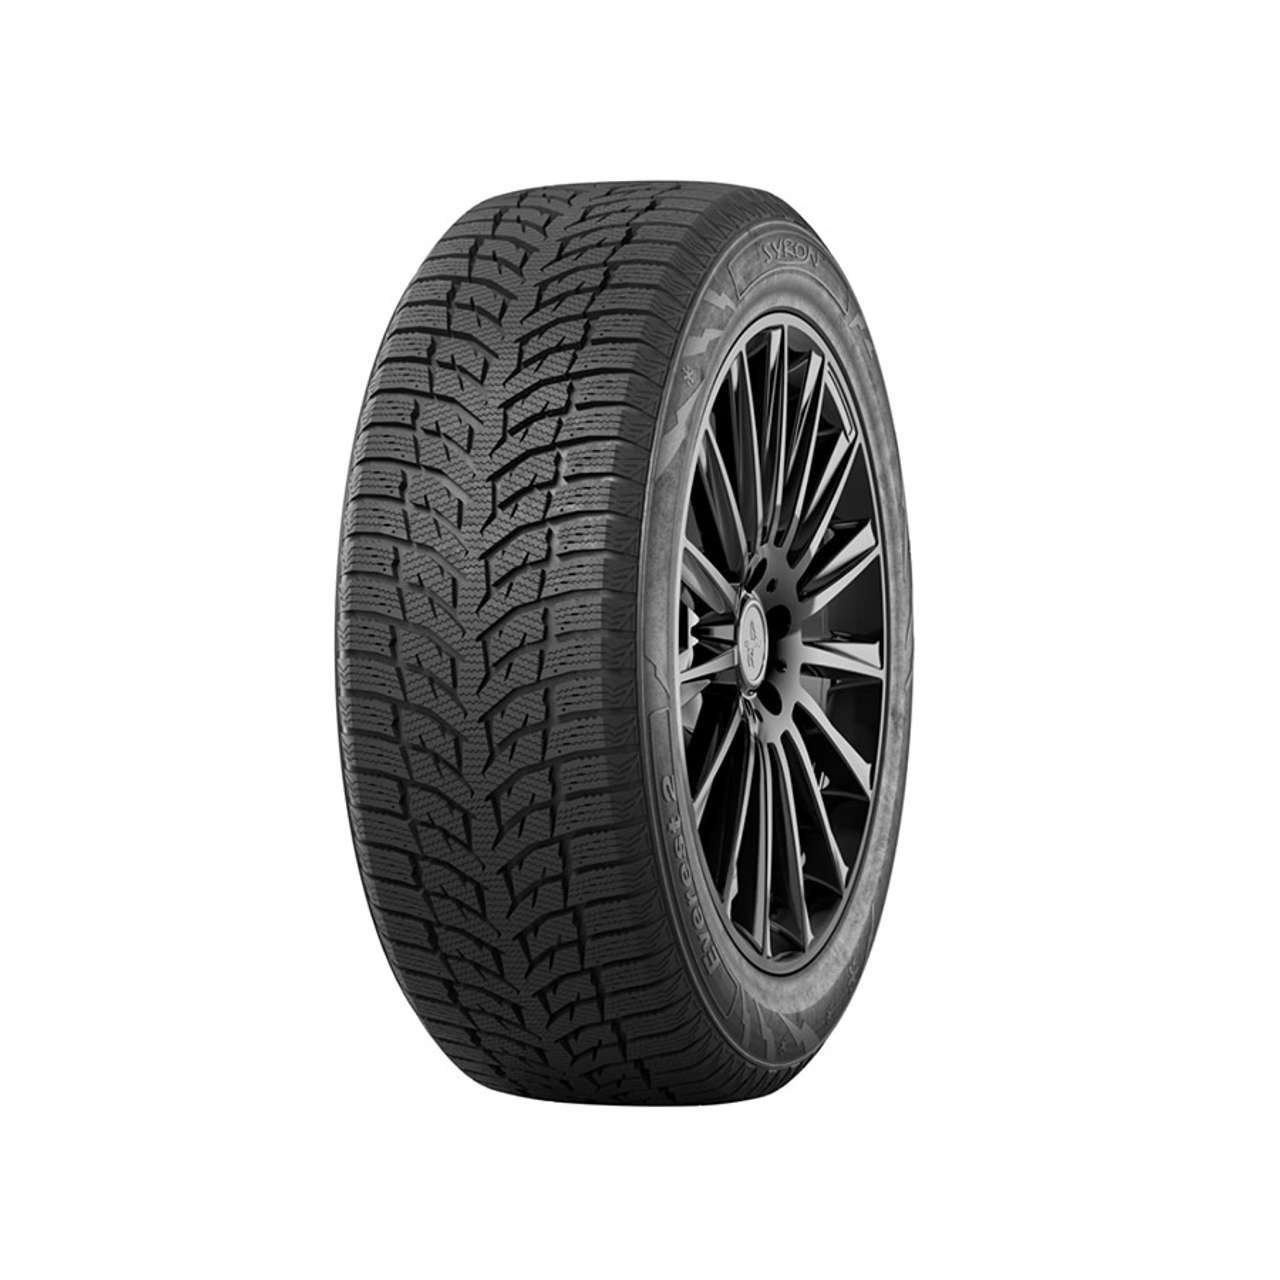 SYRON EVEREST 2 225/45R18 95H BSW